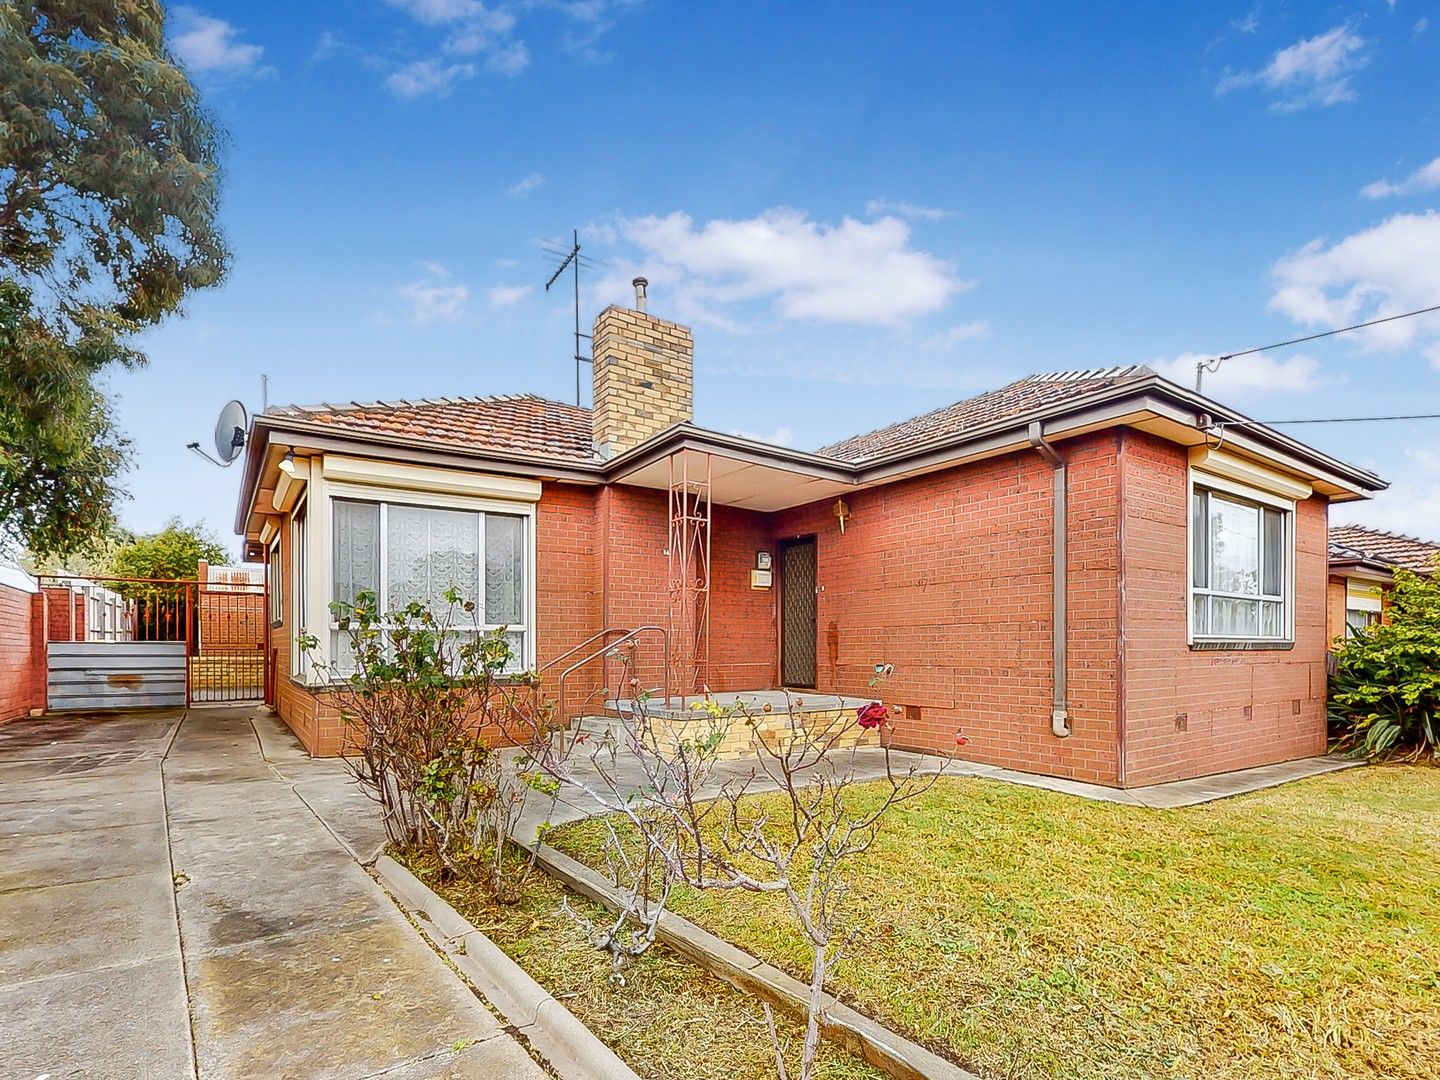 3 bedrooms House in 14 Welch Street FAWKNER VIC, 3060